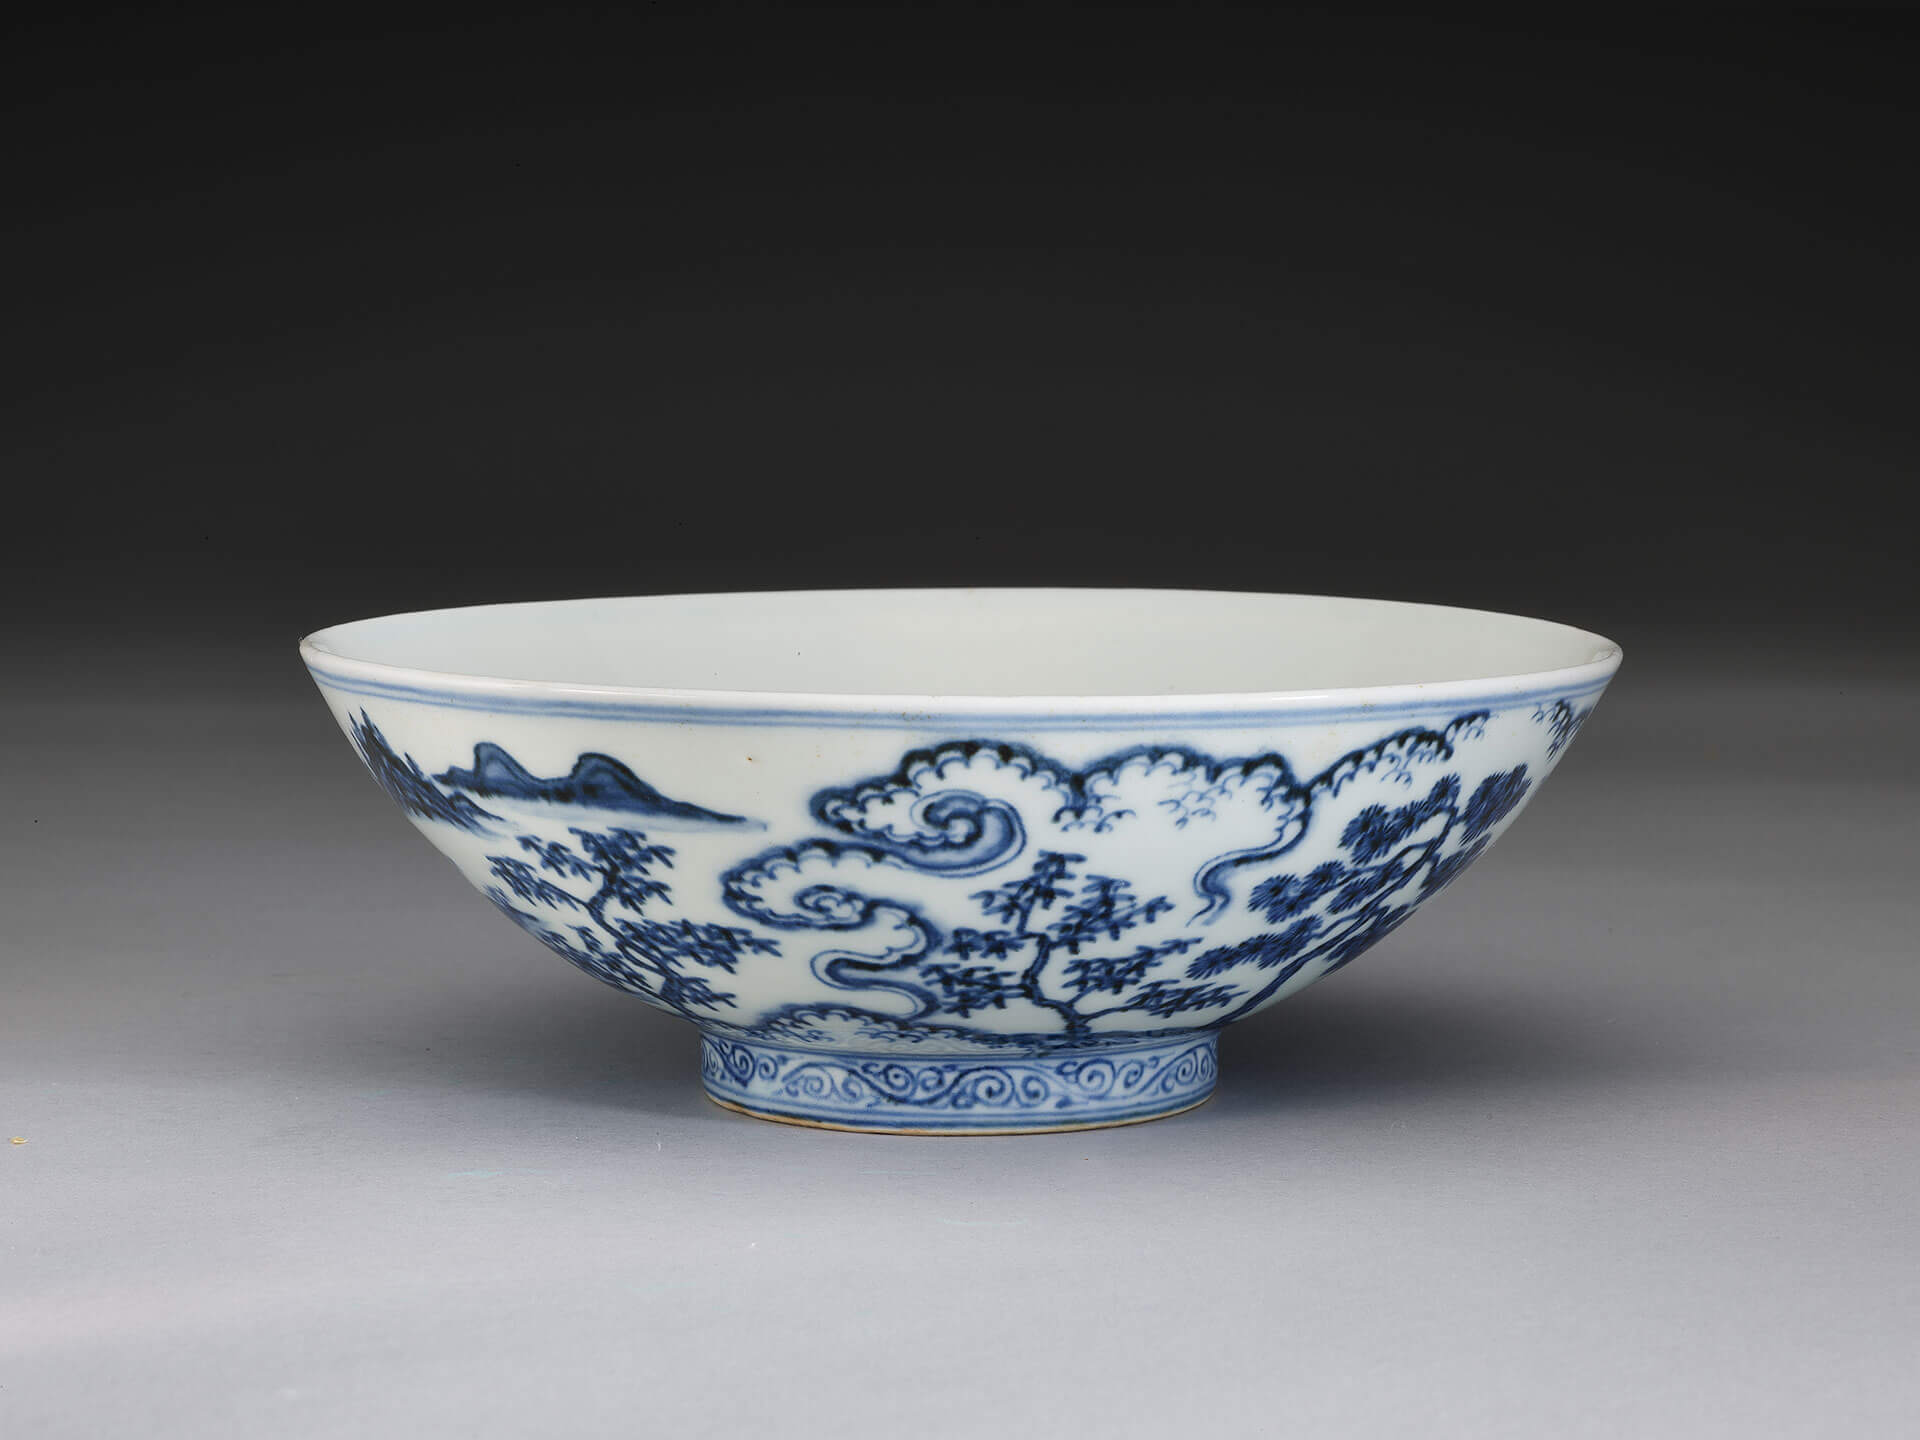 Bowl decorated with court ladies in underglaze blue